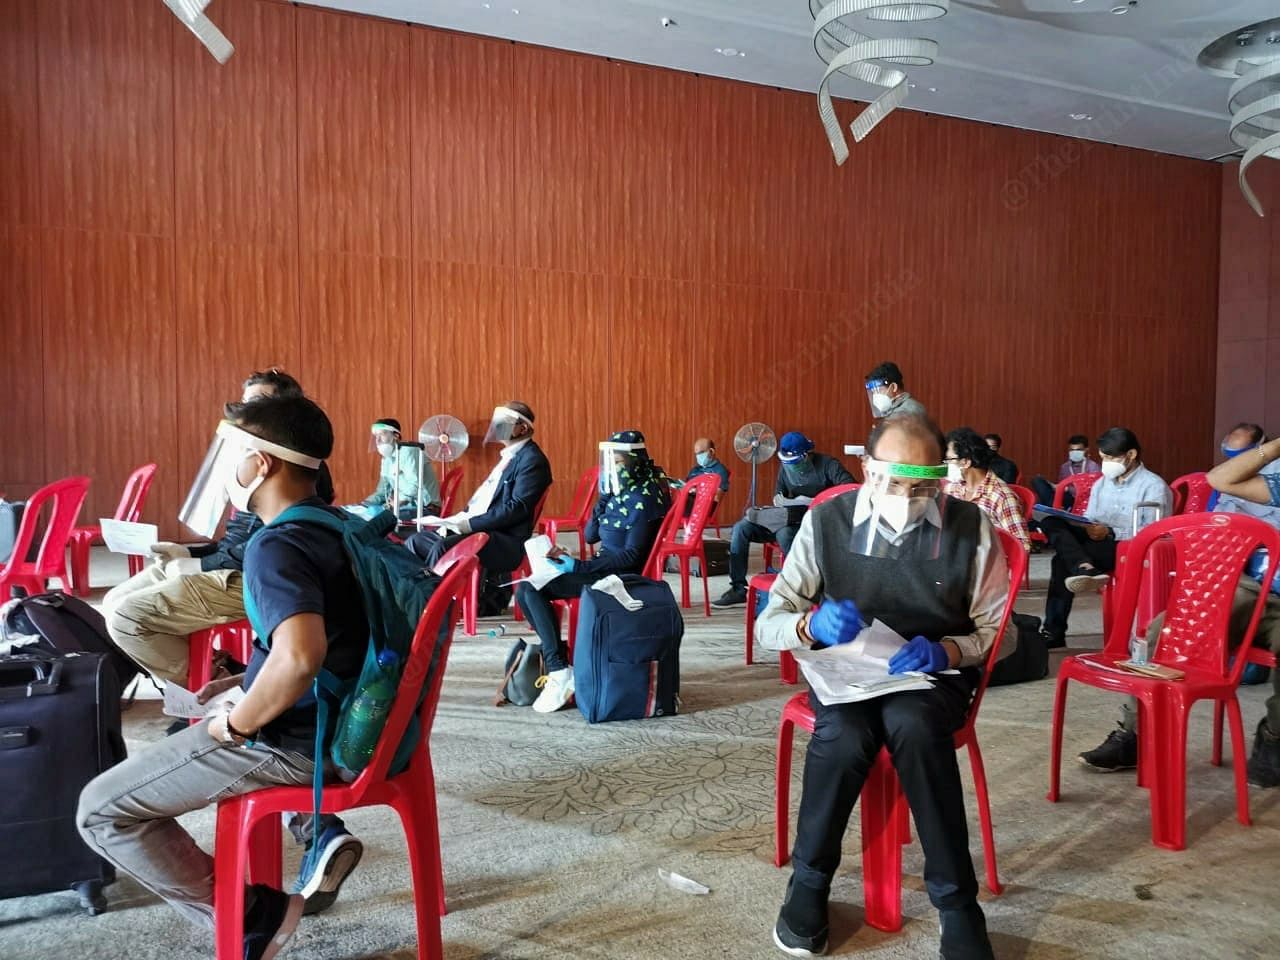 Passengers coming in via flights, are taken to the screening centres like this one at Kiranshree Grand Hotel. They are then asked to fill out forms with their details including their house addresses and comorbidities.| Photo: Angana Chakrabarti | ThePrint